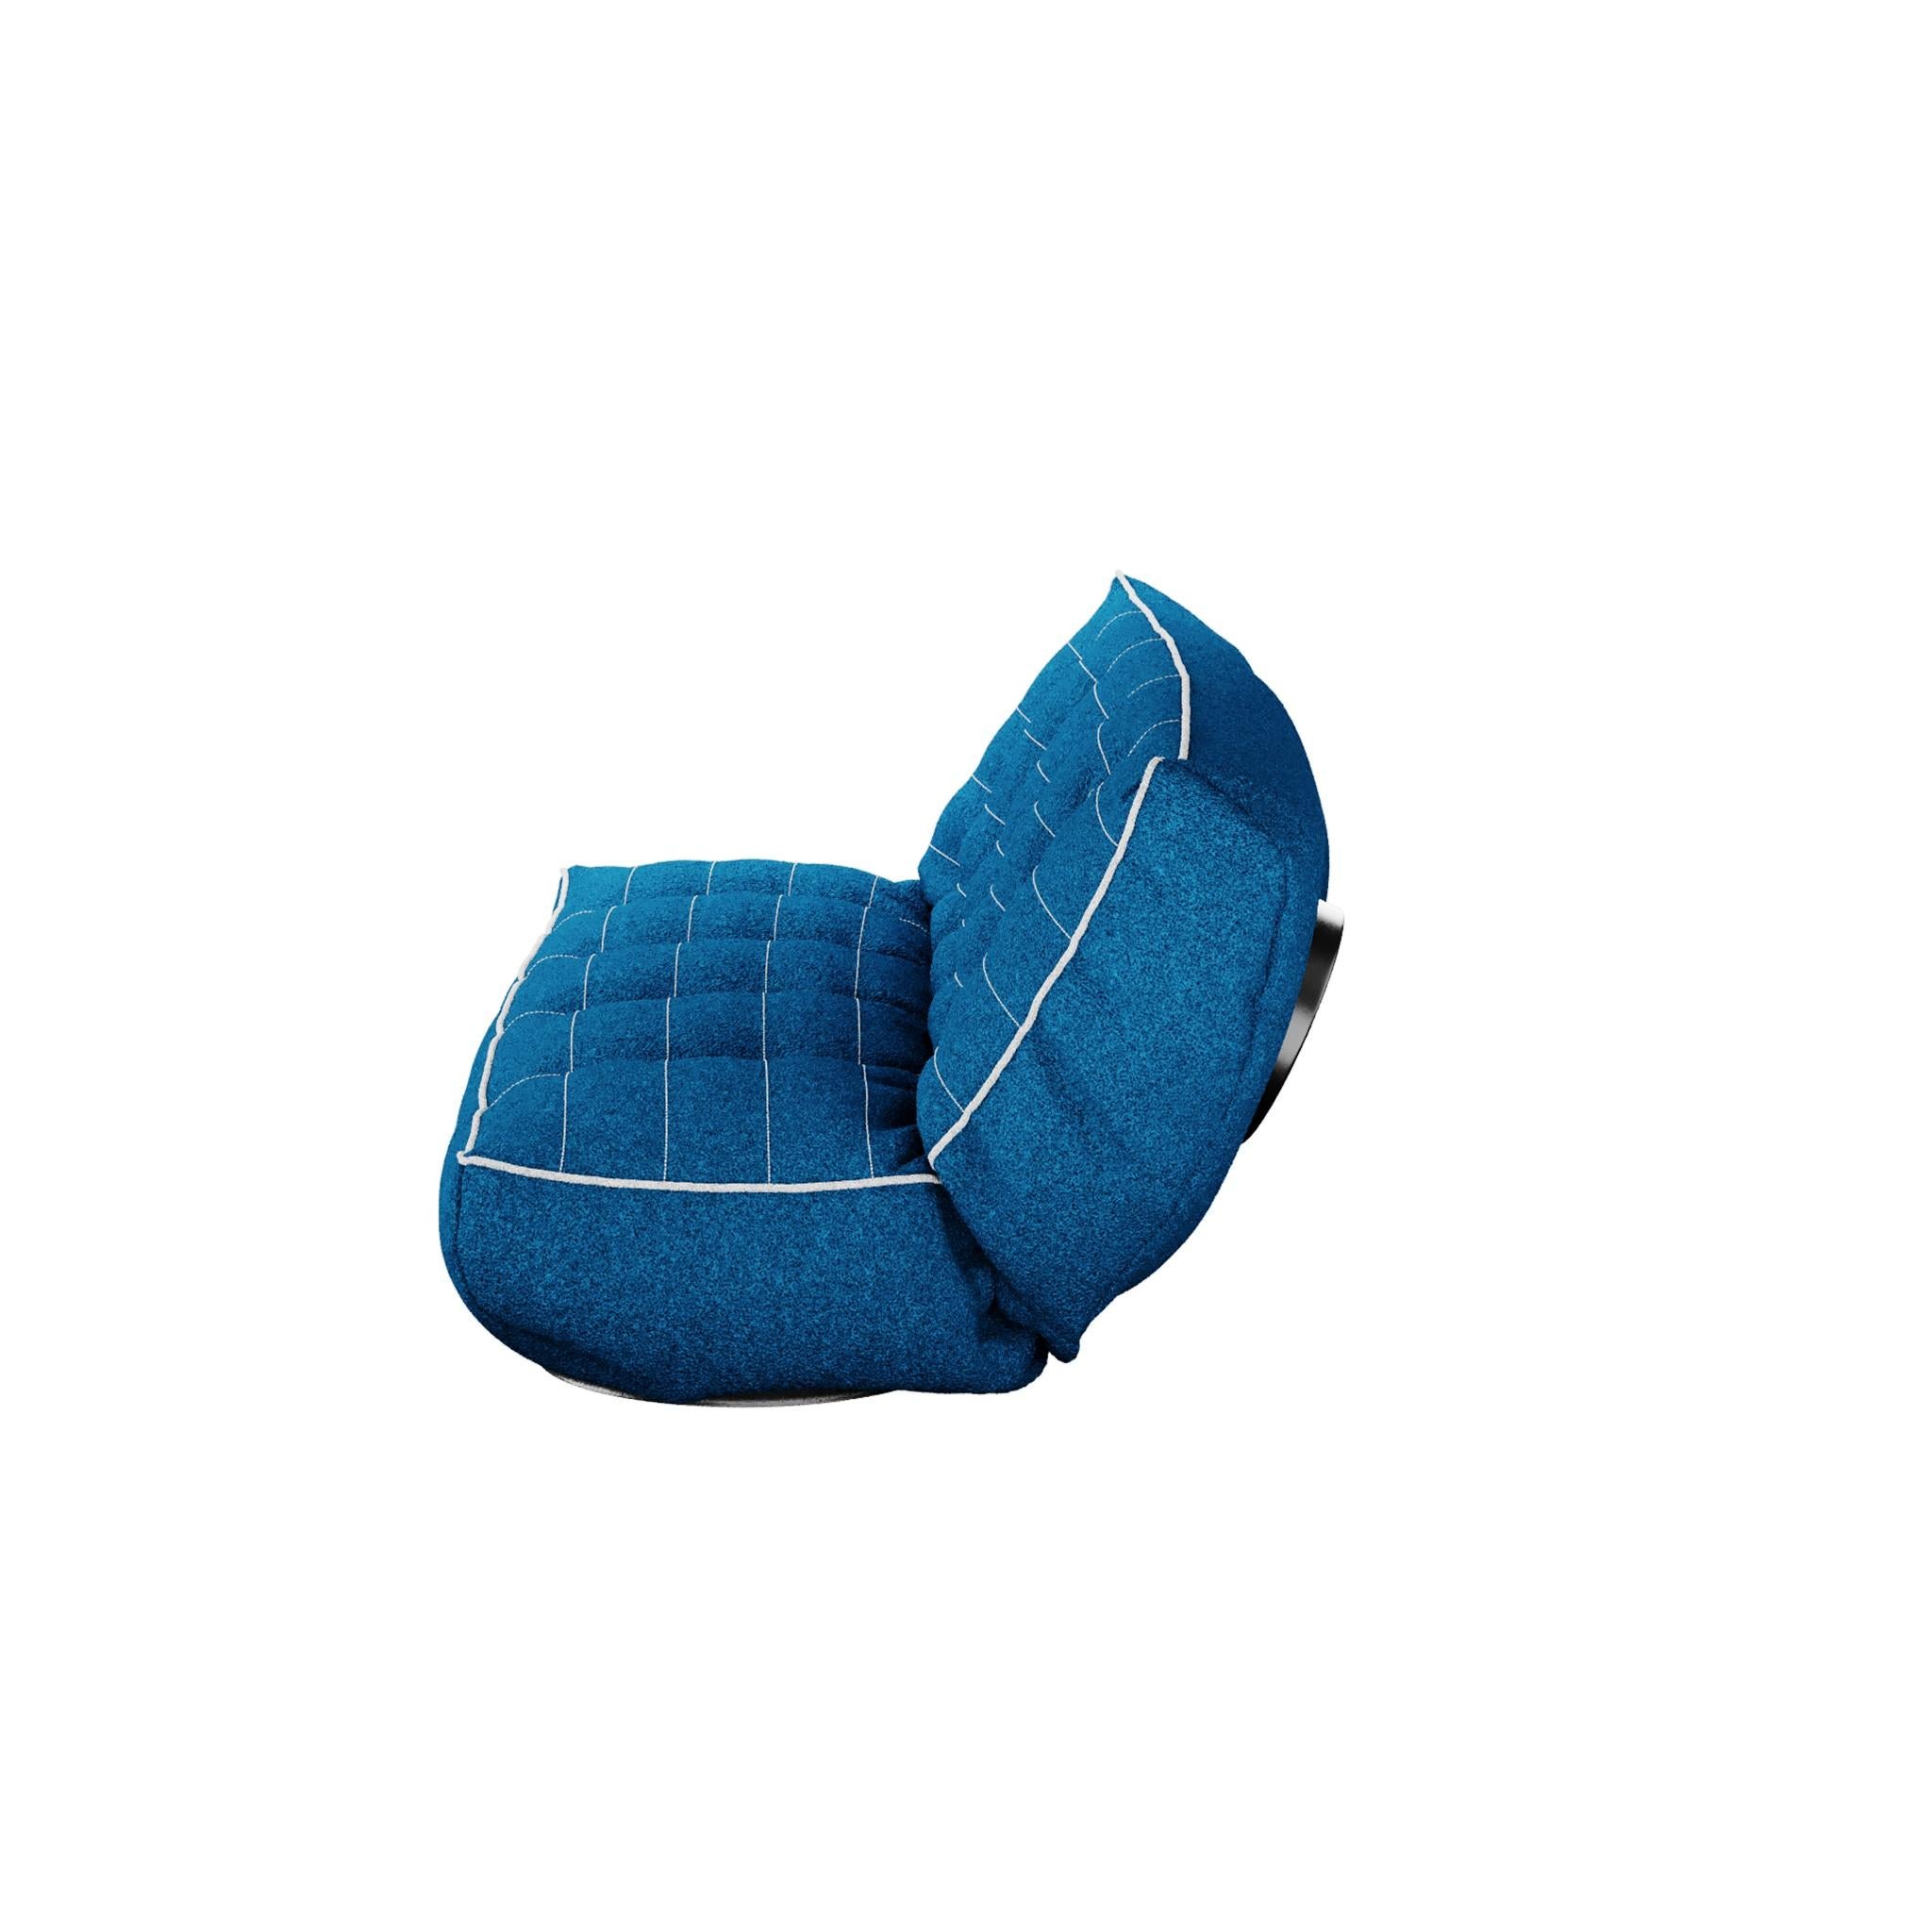 Modern Outdoor Sofa Folding Daybed Upholstered Blue Bouclé White Details For Sale 2